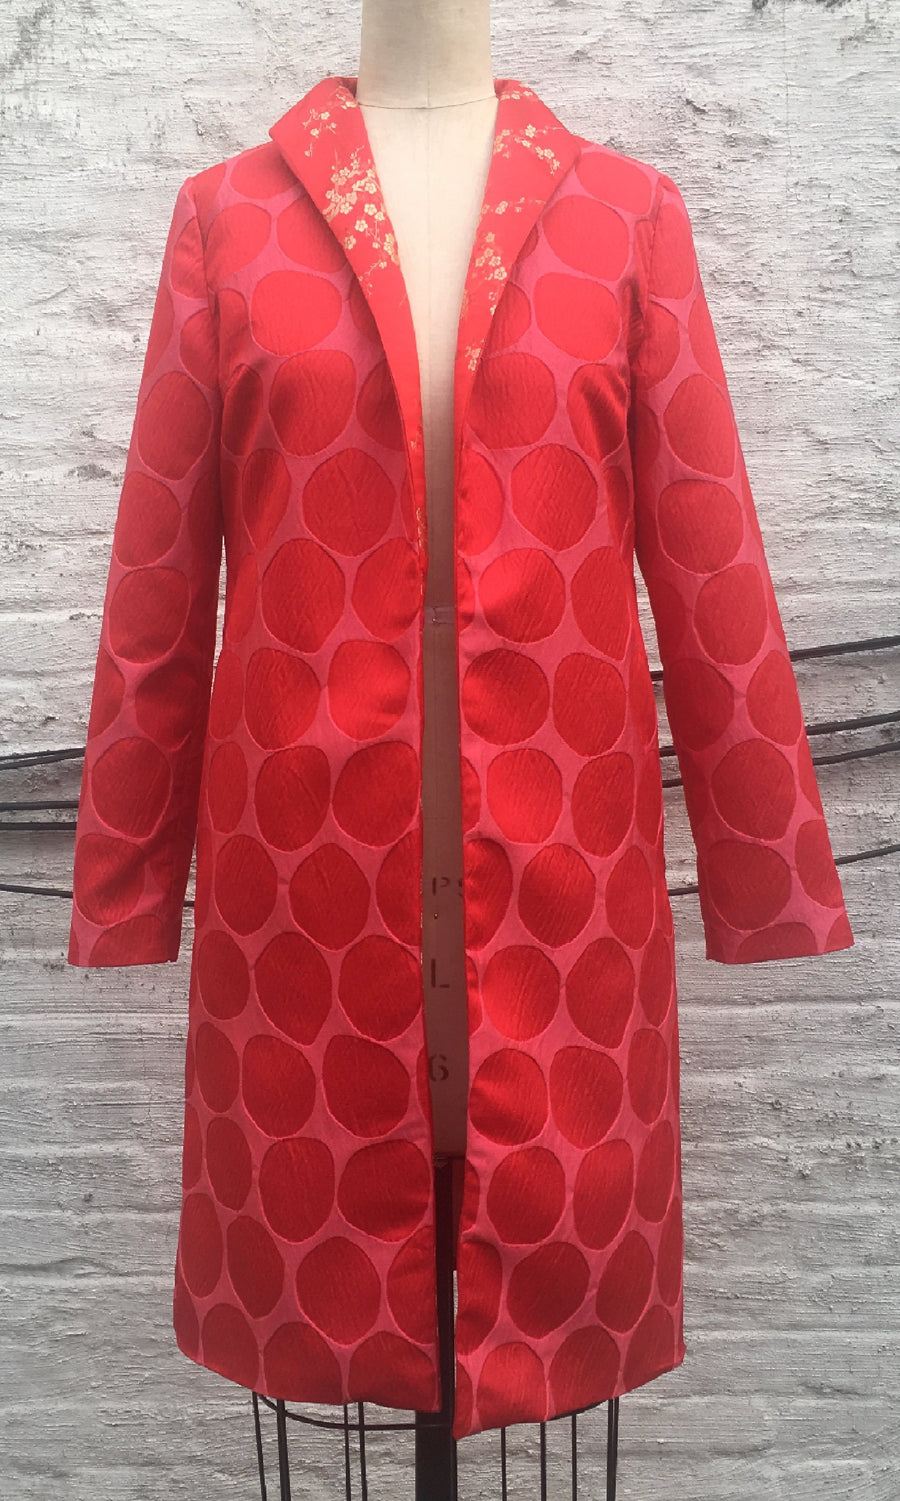 Red and Pink Dot Brocade Coat, size Small